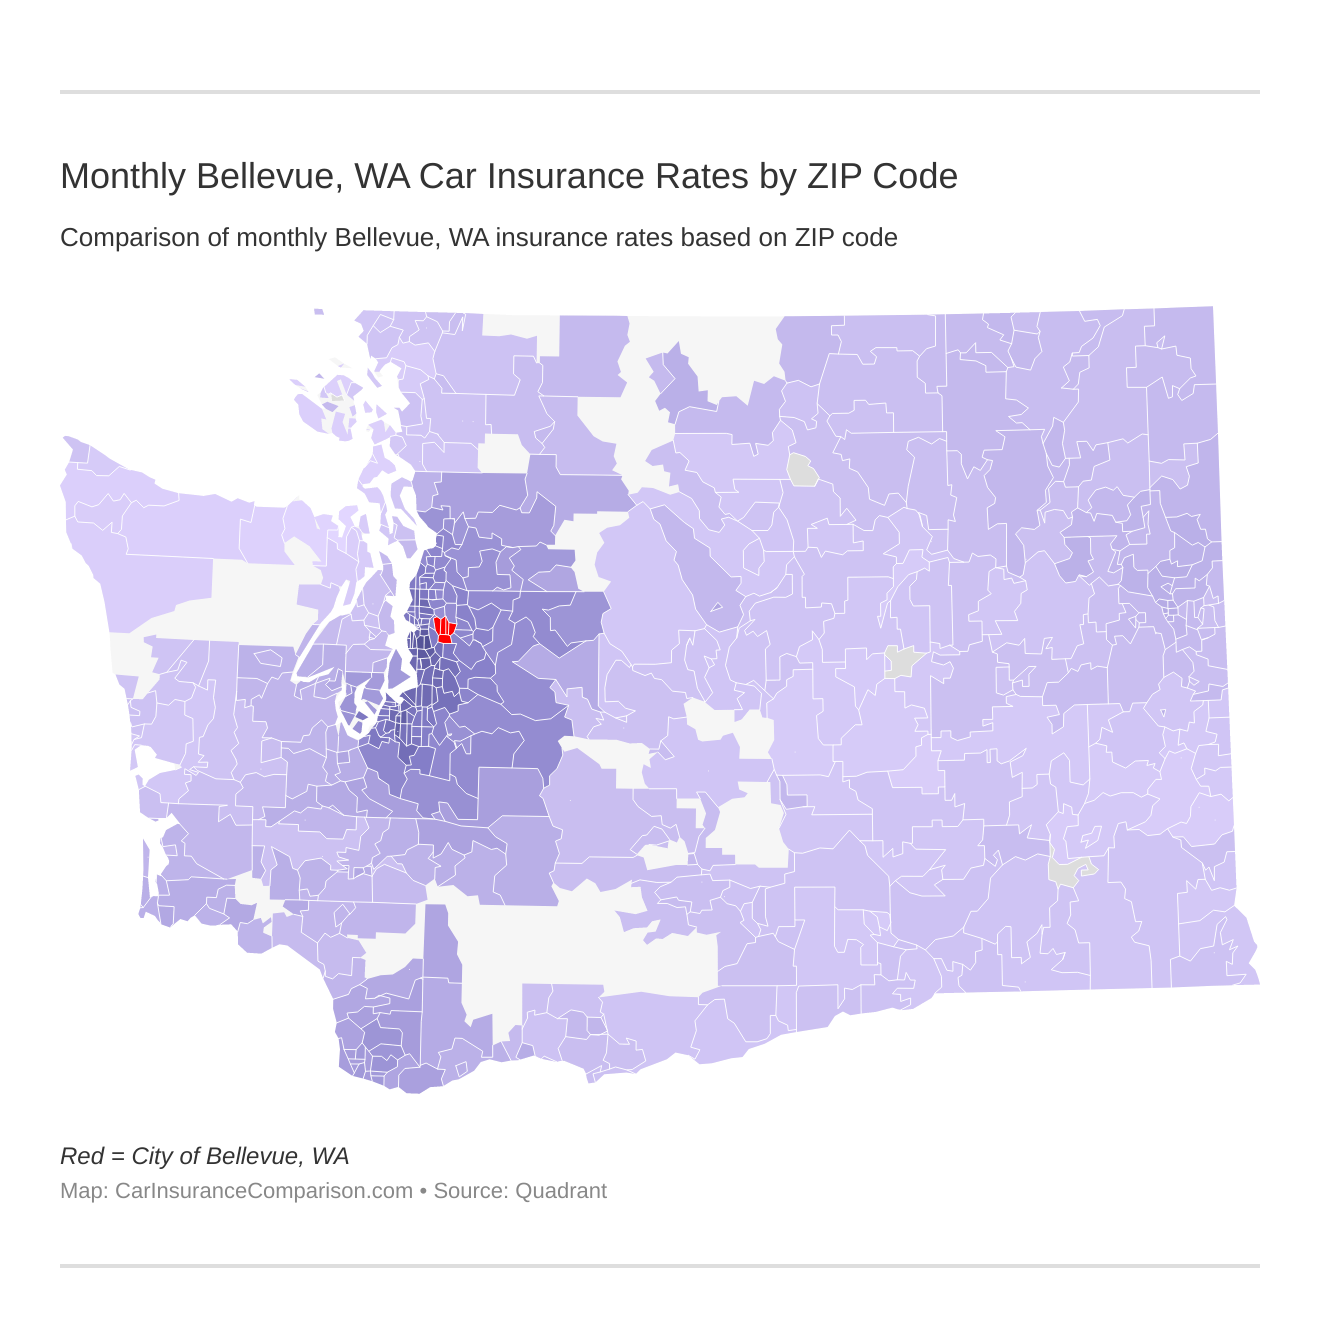 Monthly Bellevue, WA Car Insurance Rates by ZIP Code